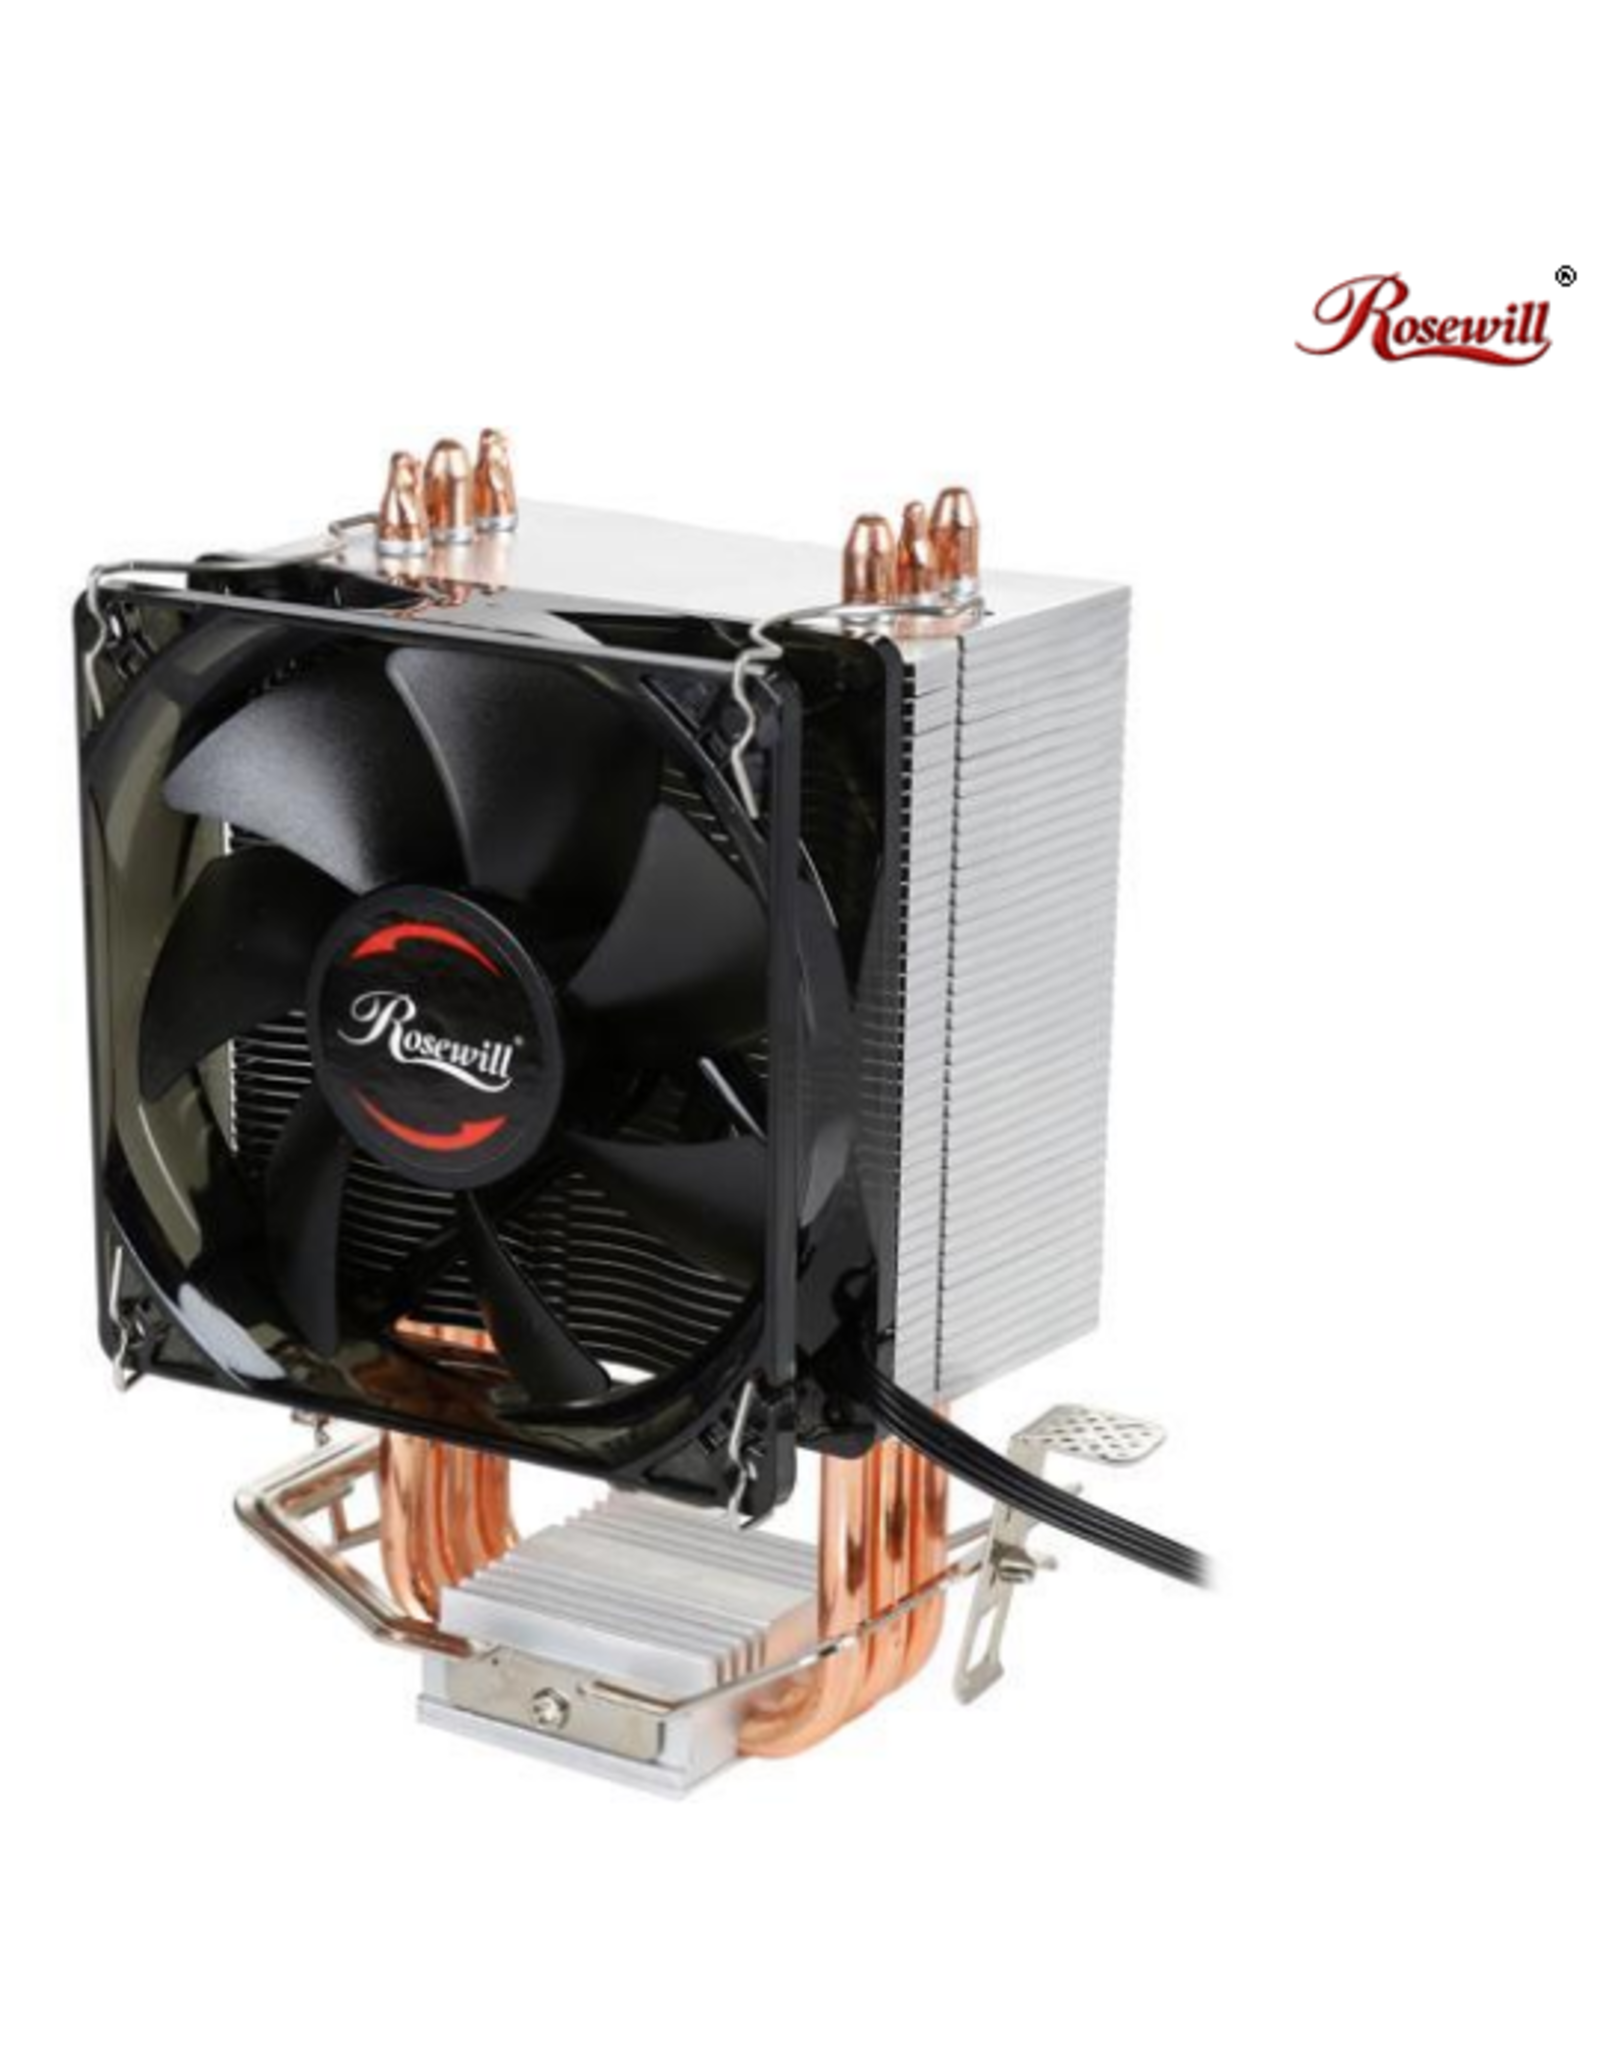 Rosewill Rosewill ROCC-16003 - High Performance CPU Cooler with Silent 92mm PWM Fan & 3 Direct Contact Heatpipe